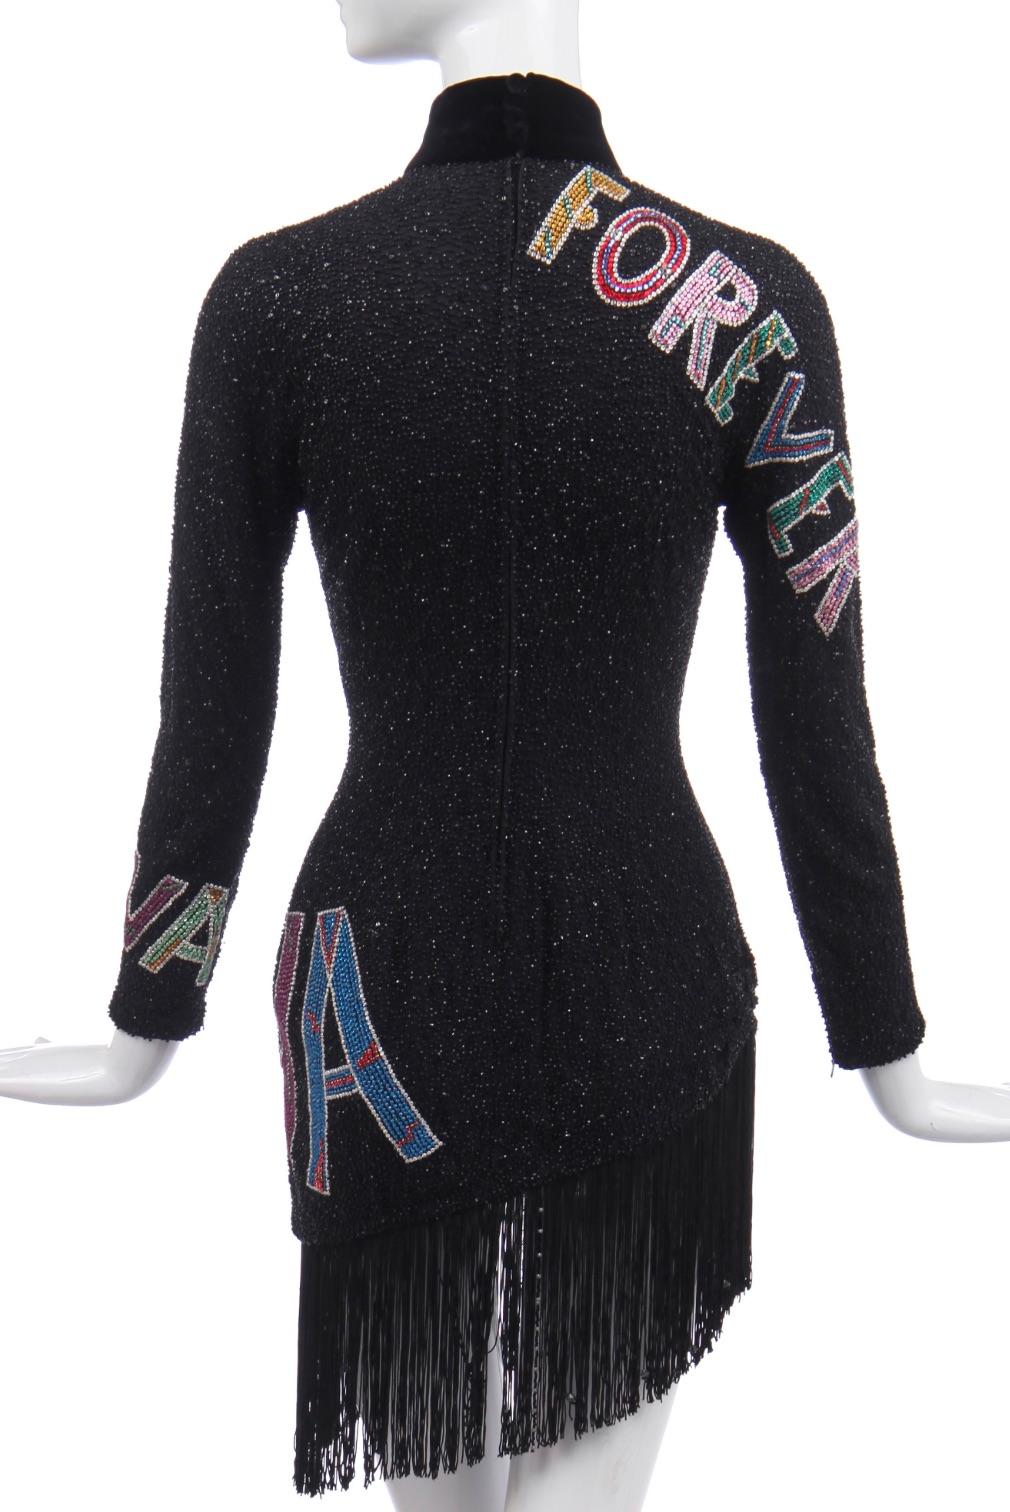 Women's Gianni Versace couture beaded 'Java Forever' dress, Autumn-Winter 1989-90